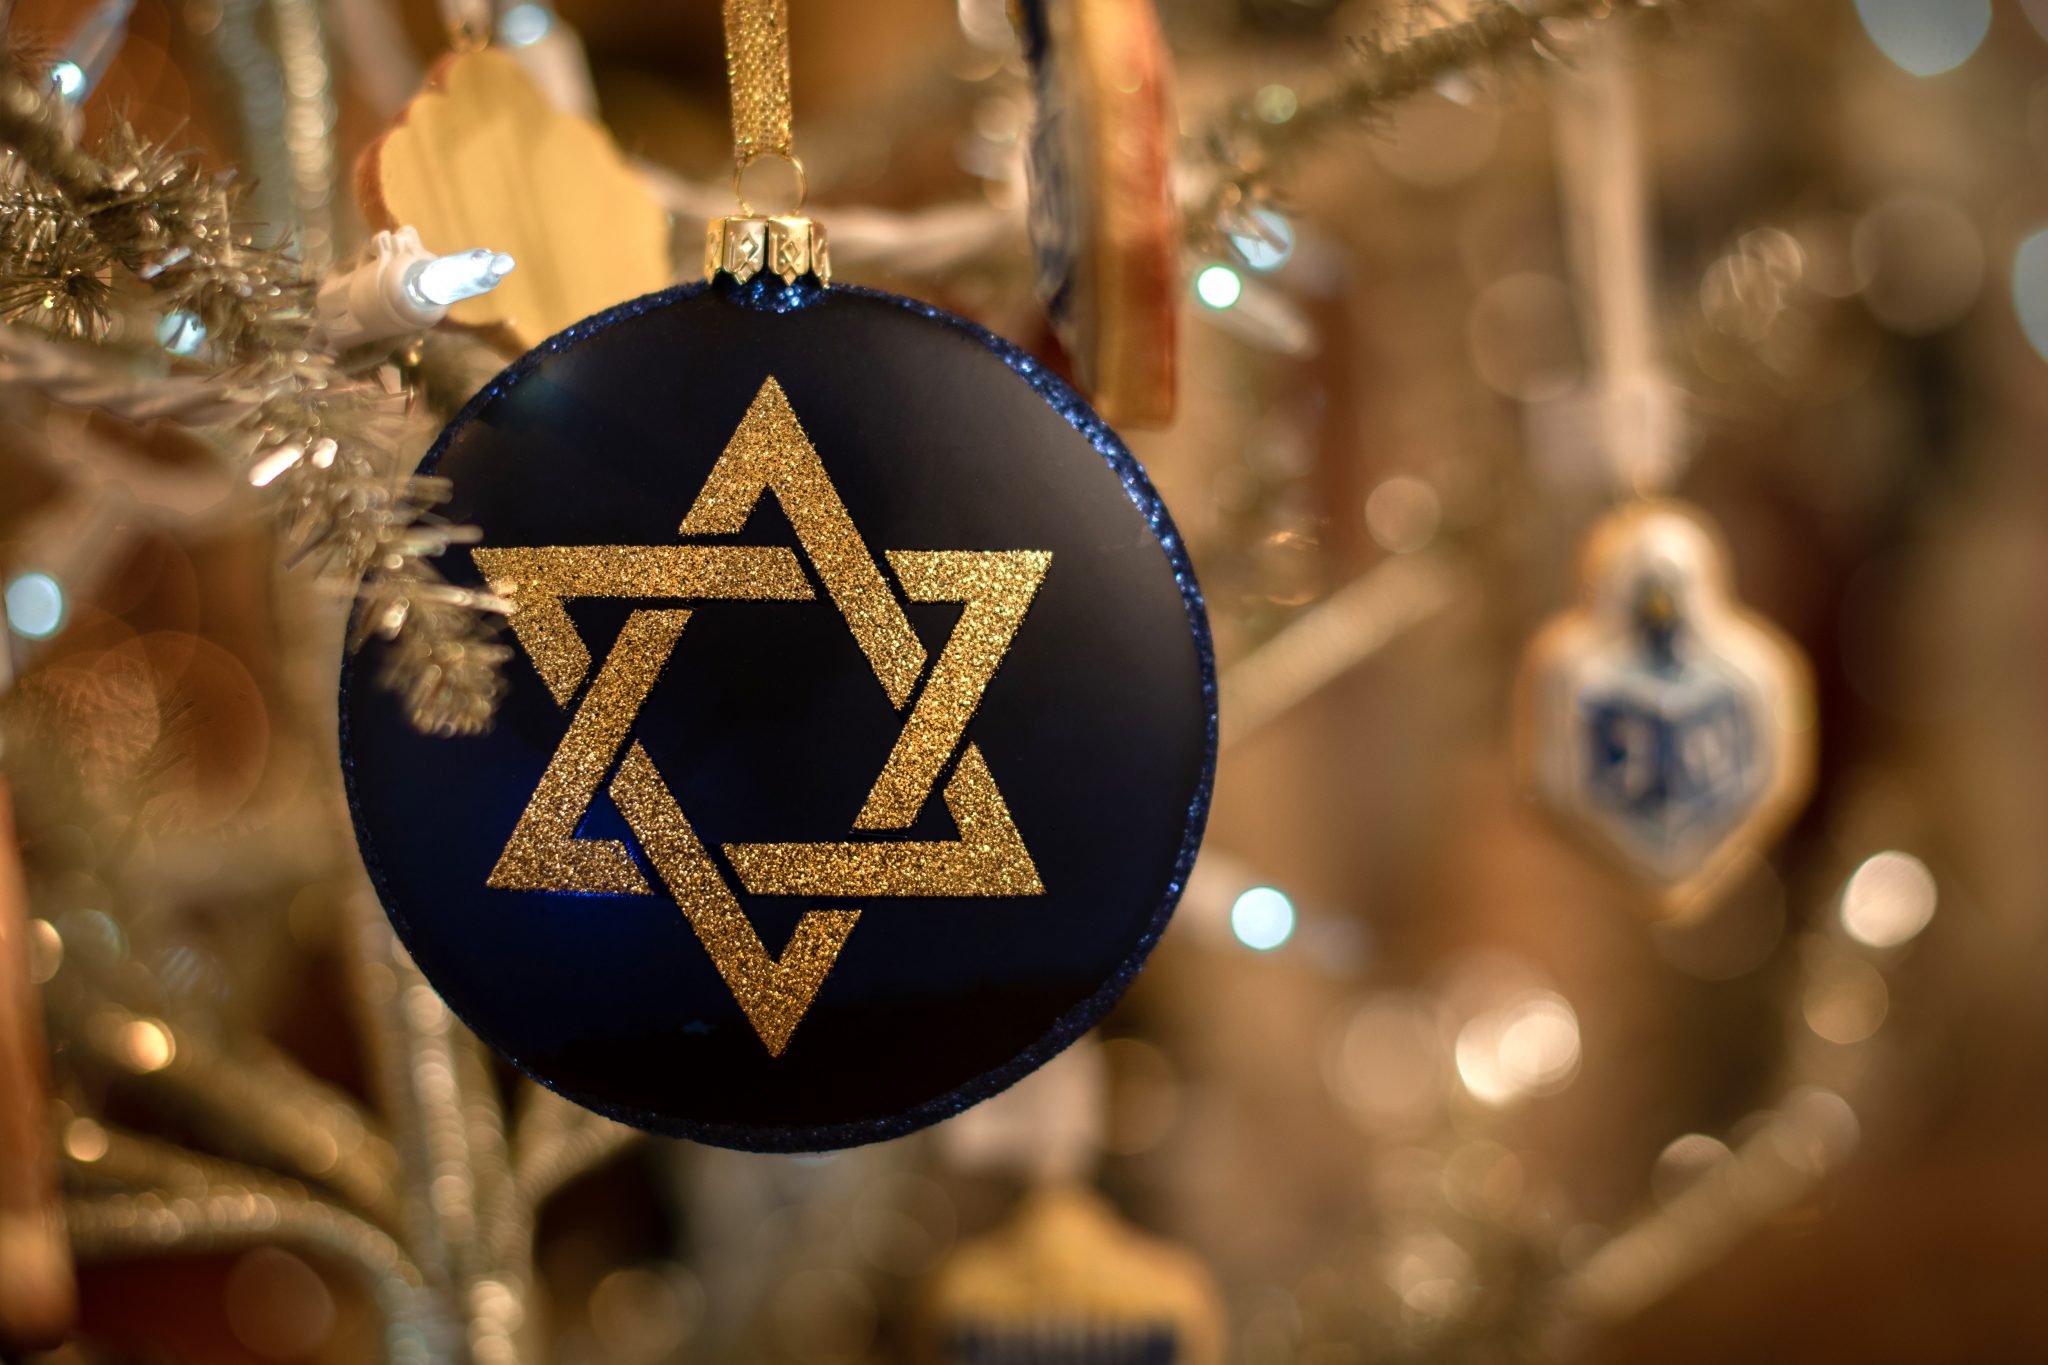 a Star of David ornament on a Christmas tree